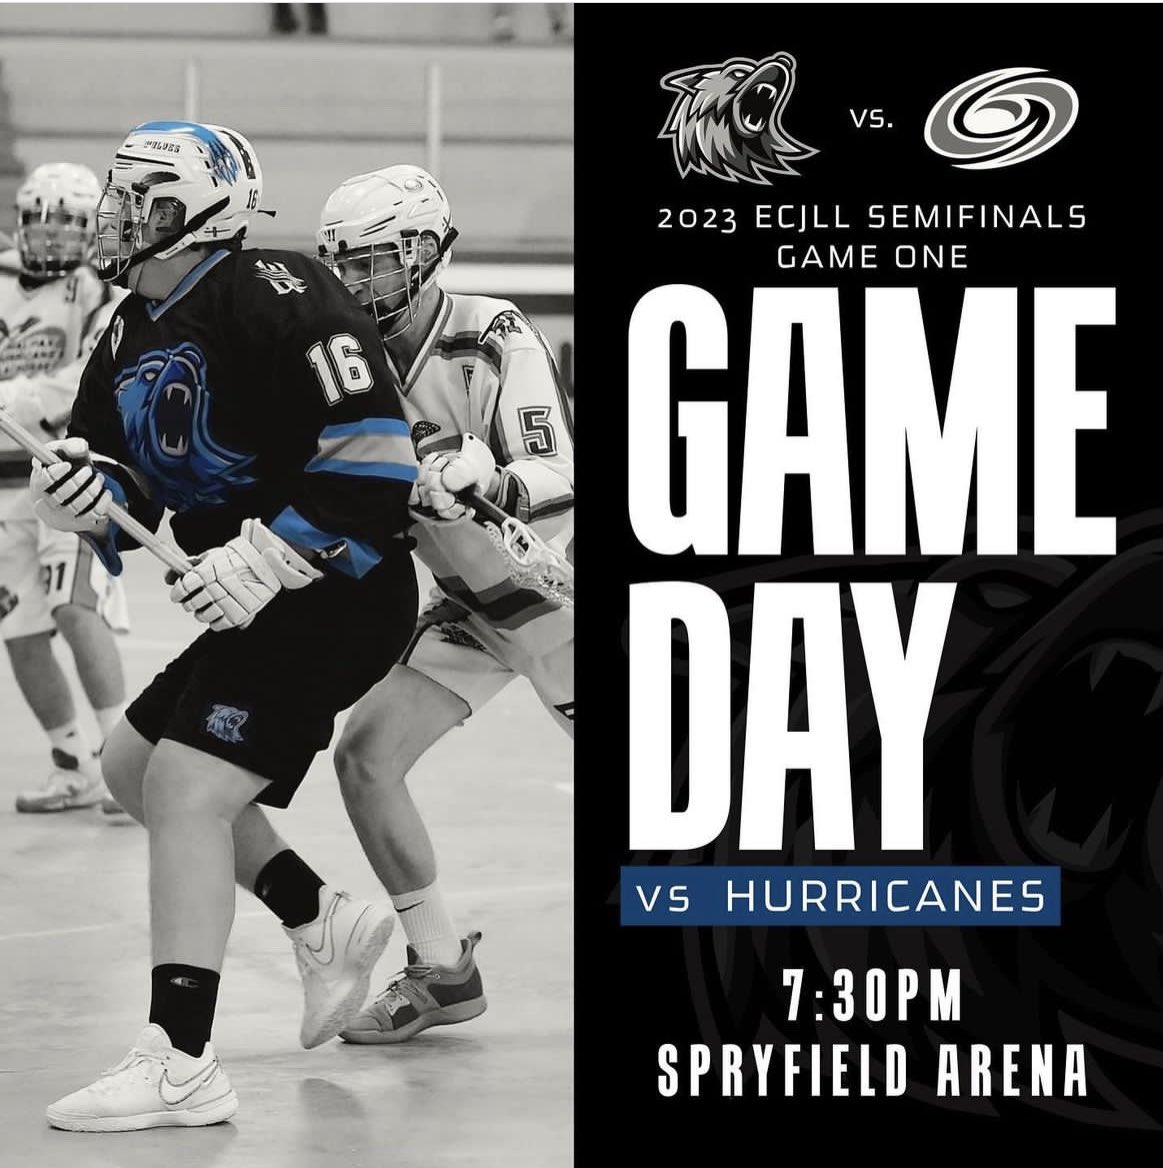 Game 1 tonight in Spryfield. #runwiththewolves #wolvesplayoffs

Live stream link (no audio): youtube.com/live/lUmPPZfYS…